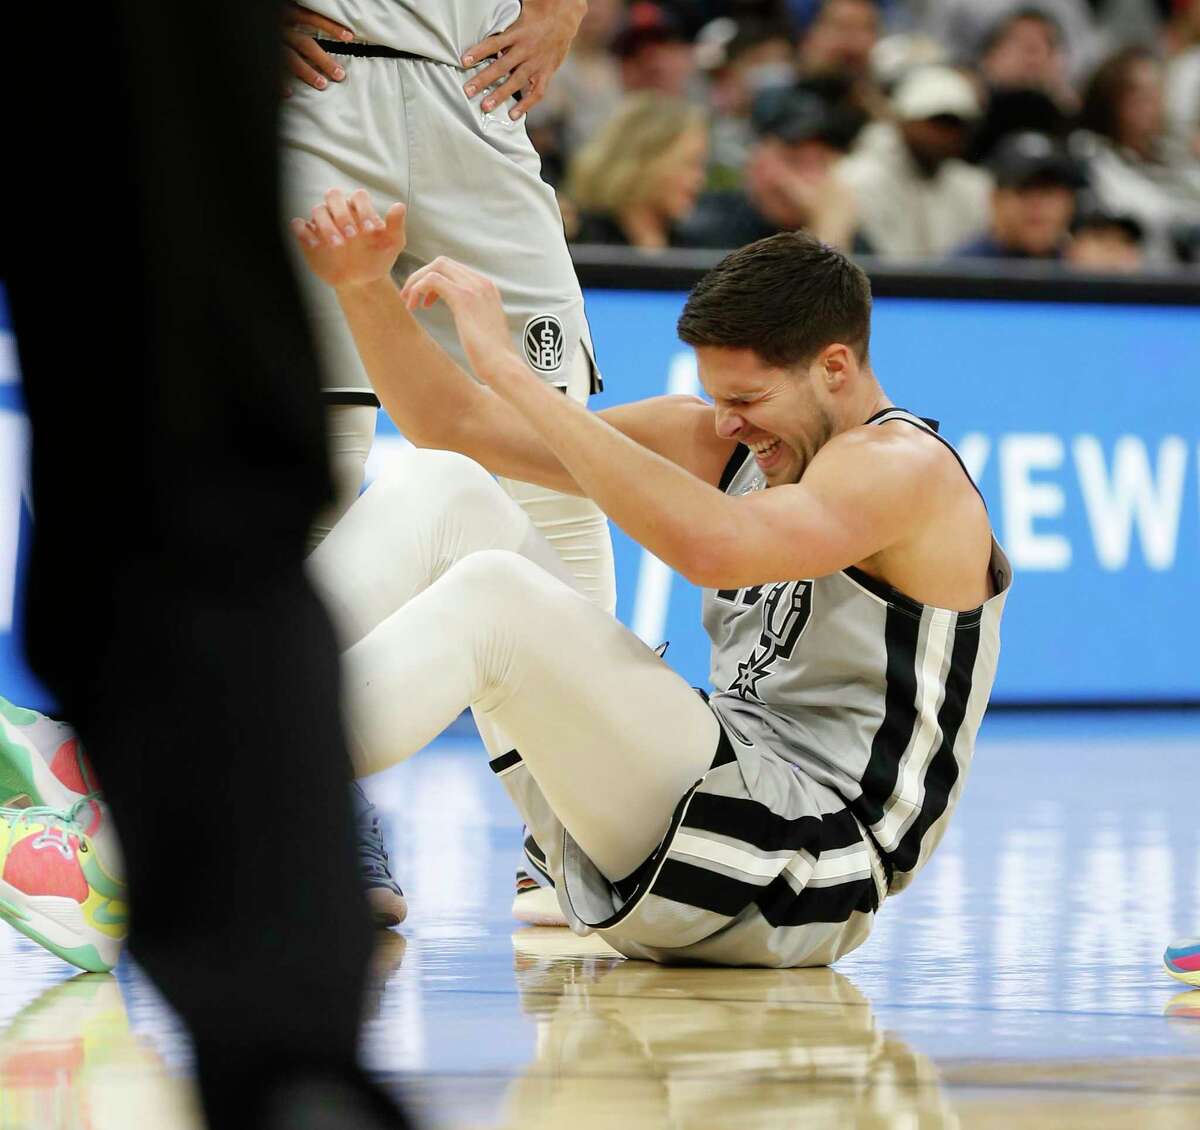 Back after missing the previous game with an illness, Doug McDermott lasted just three minutes Saturday before twisting his ankle.